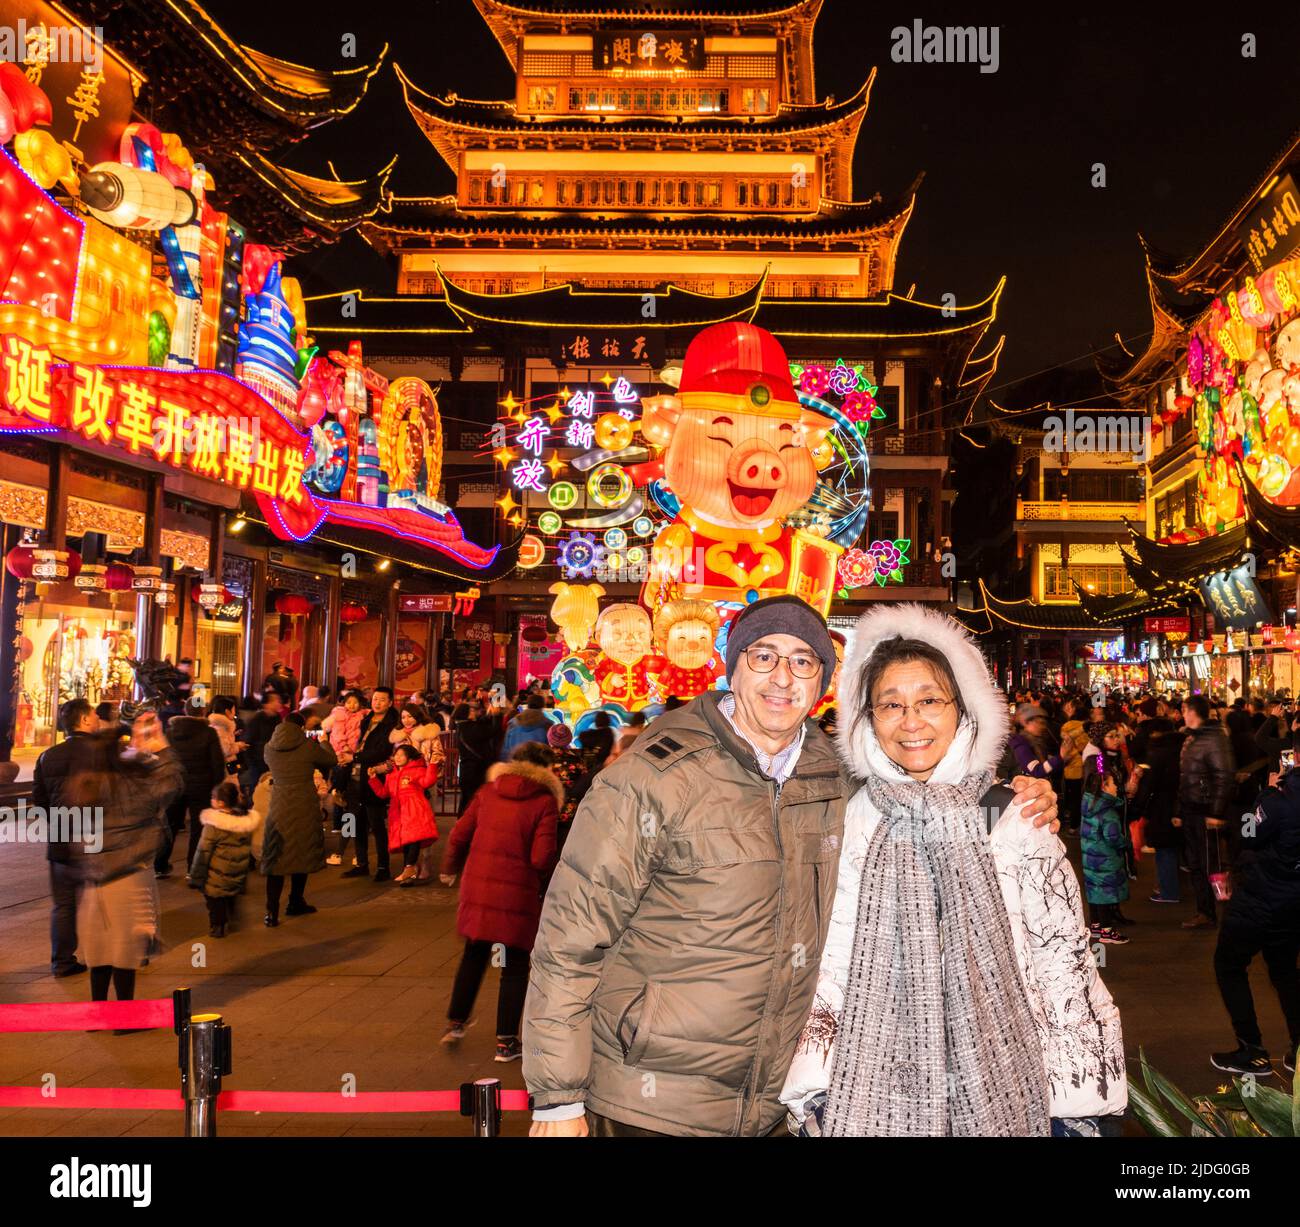 A couple pose in front of the Year of the Pig display at Yu Yuan, Yu Garden Yixiulou building in Old Shanghai. Stock Photo